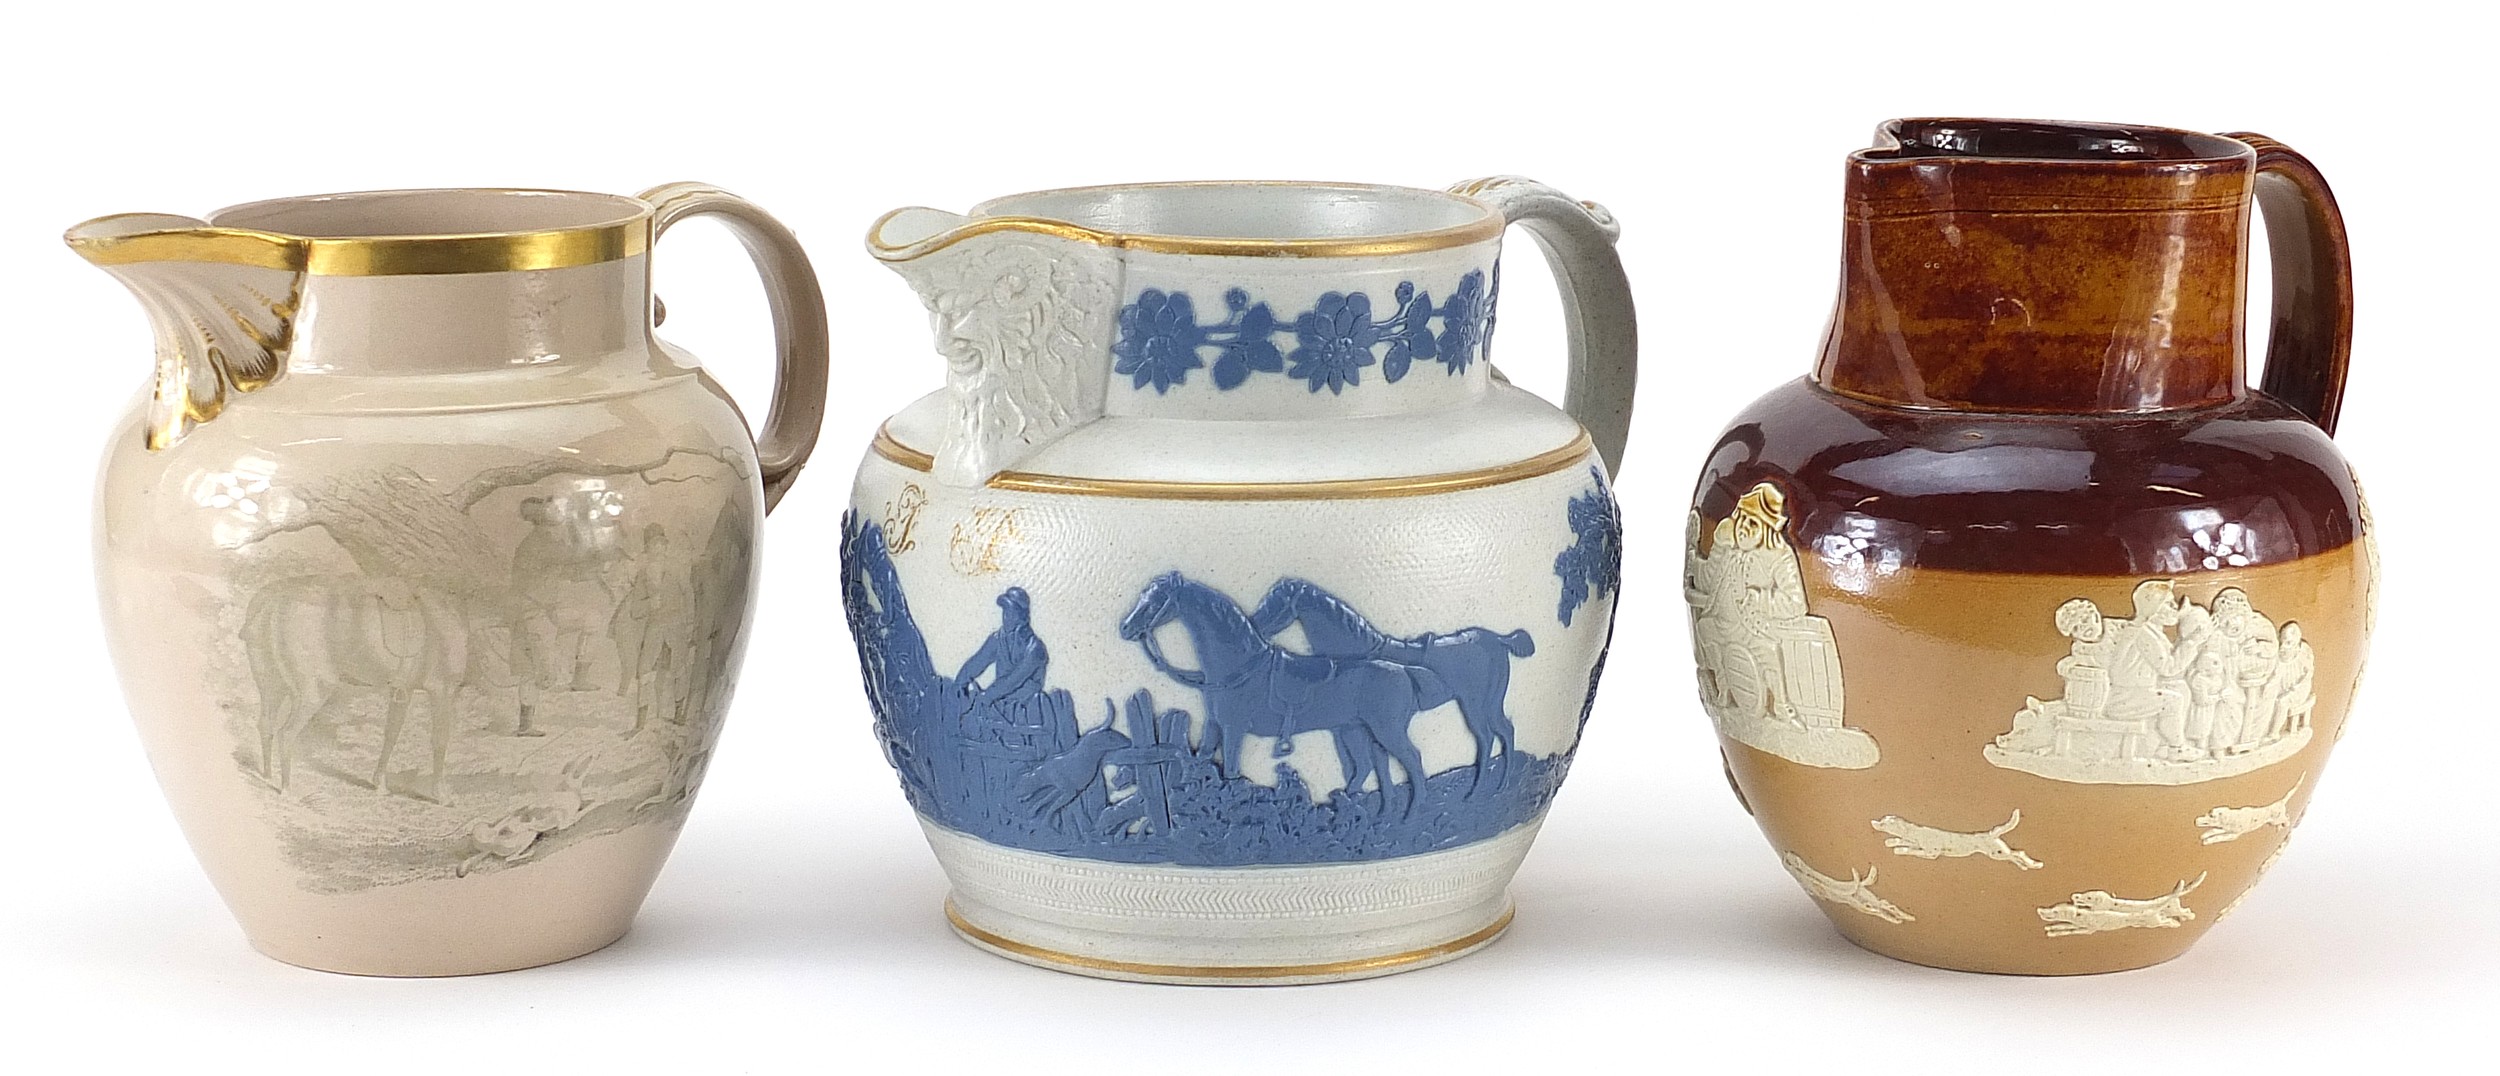 Three 19th century and later hunting interest jugs including an example with applied sprigging,